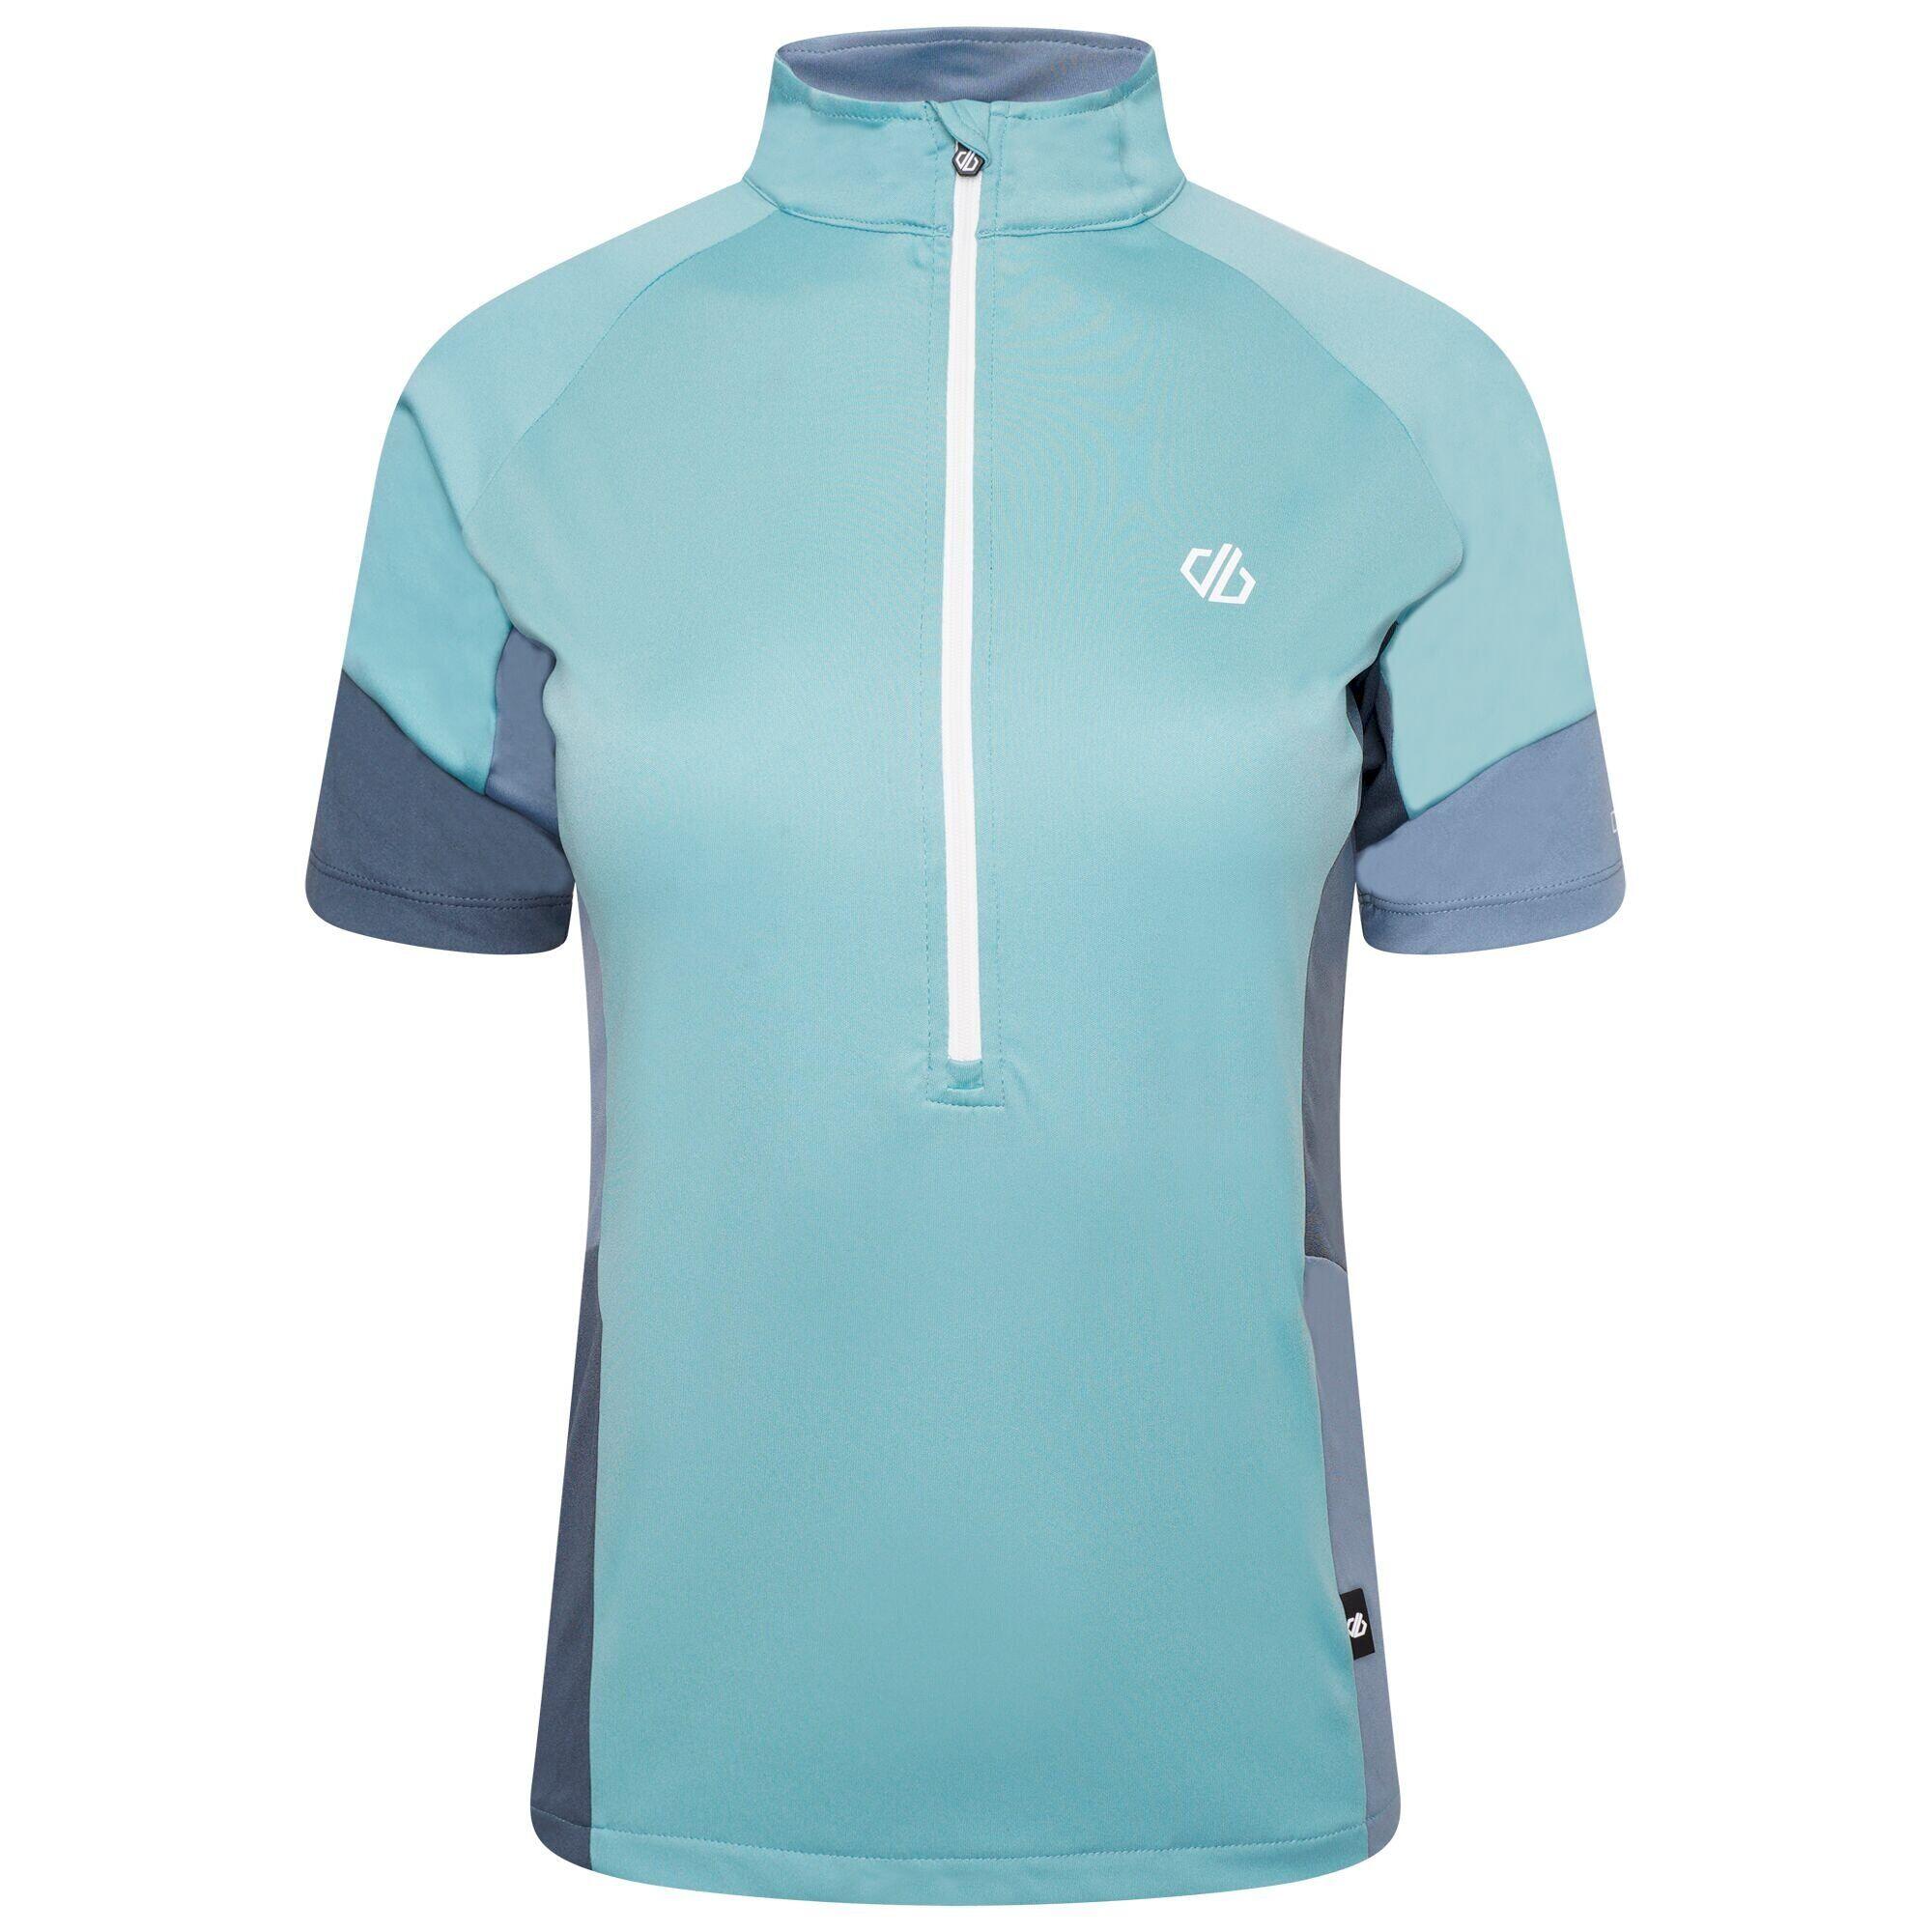 Womens/Ladies Compassion II Lightweight Jersey (Meadowbrook Green/Blue) 1/5